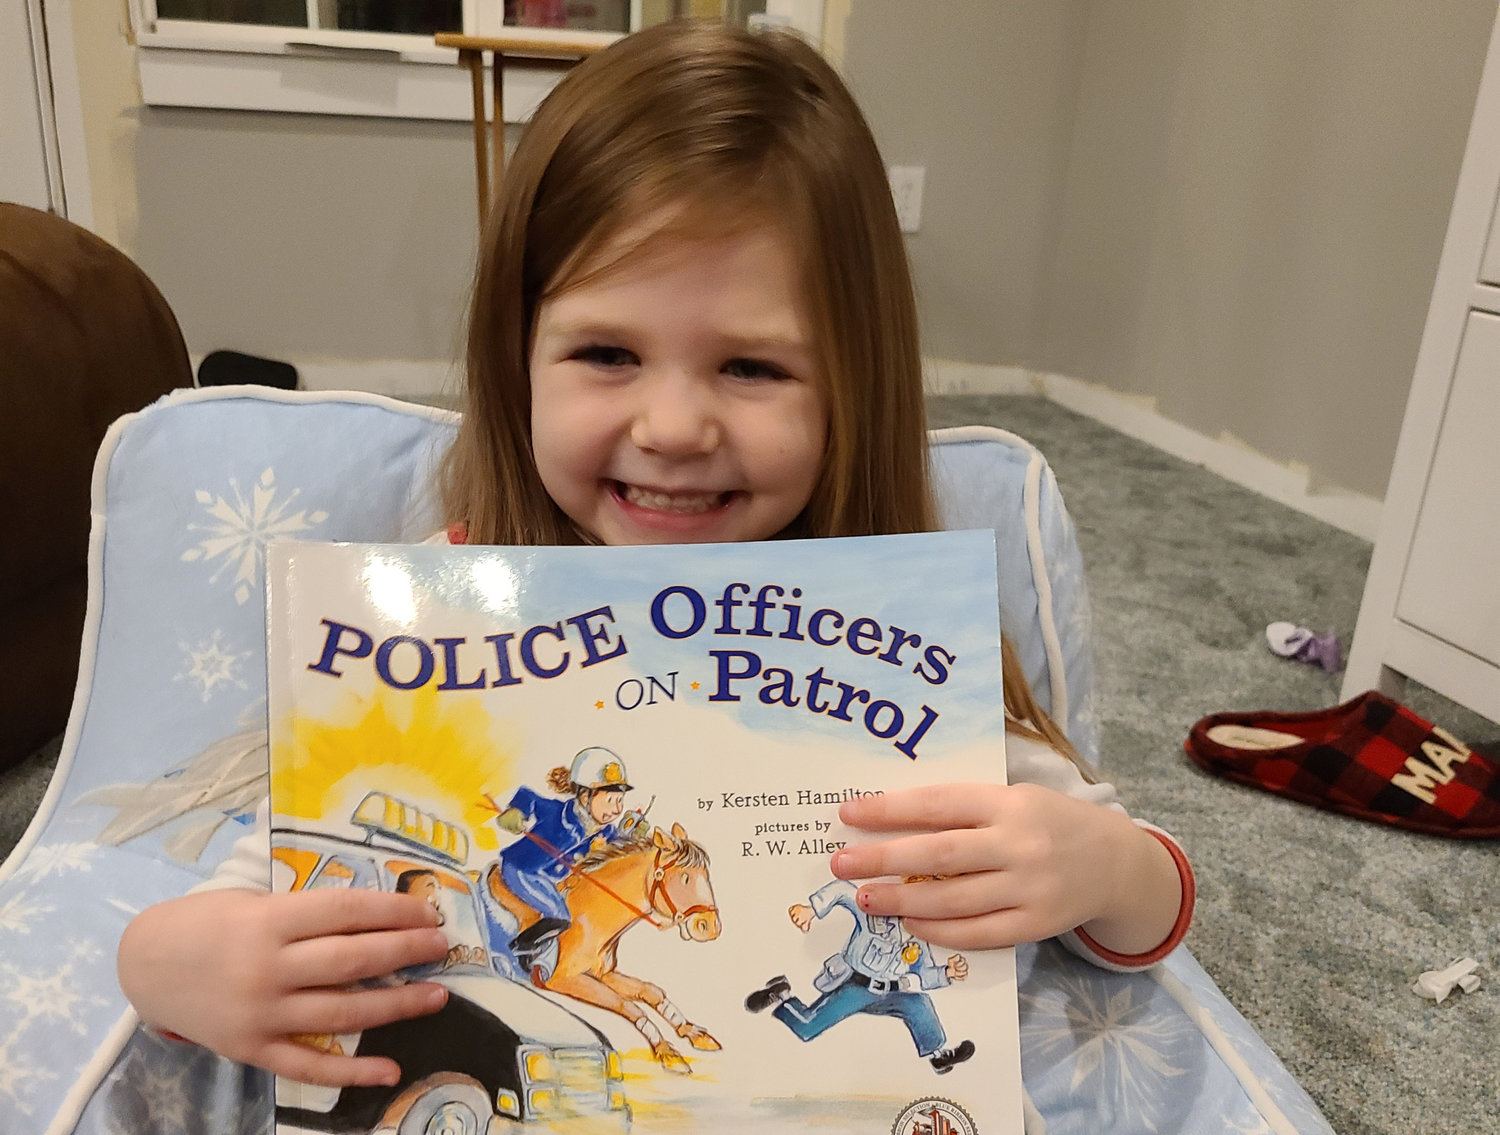 Gracie holds up a book sent to her as part of the Dolly Parton Imagination Library.